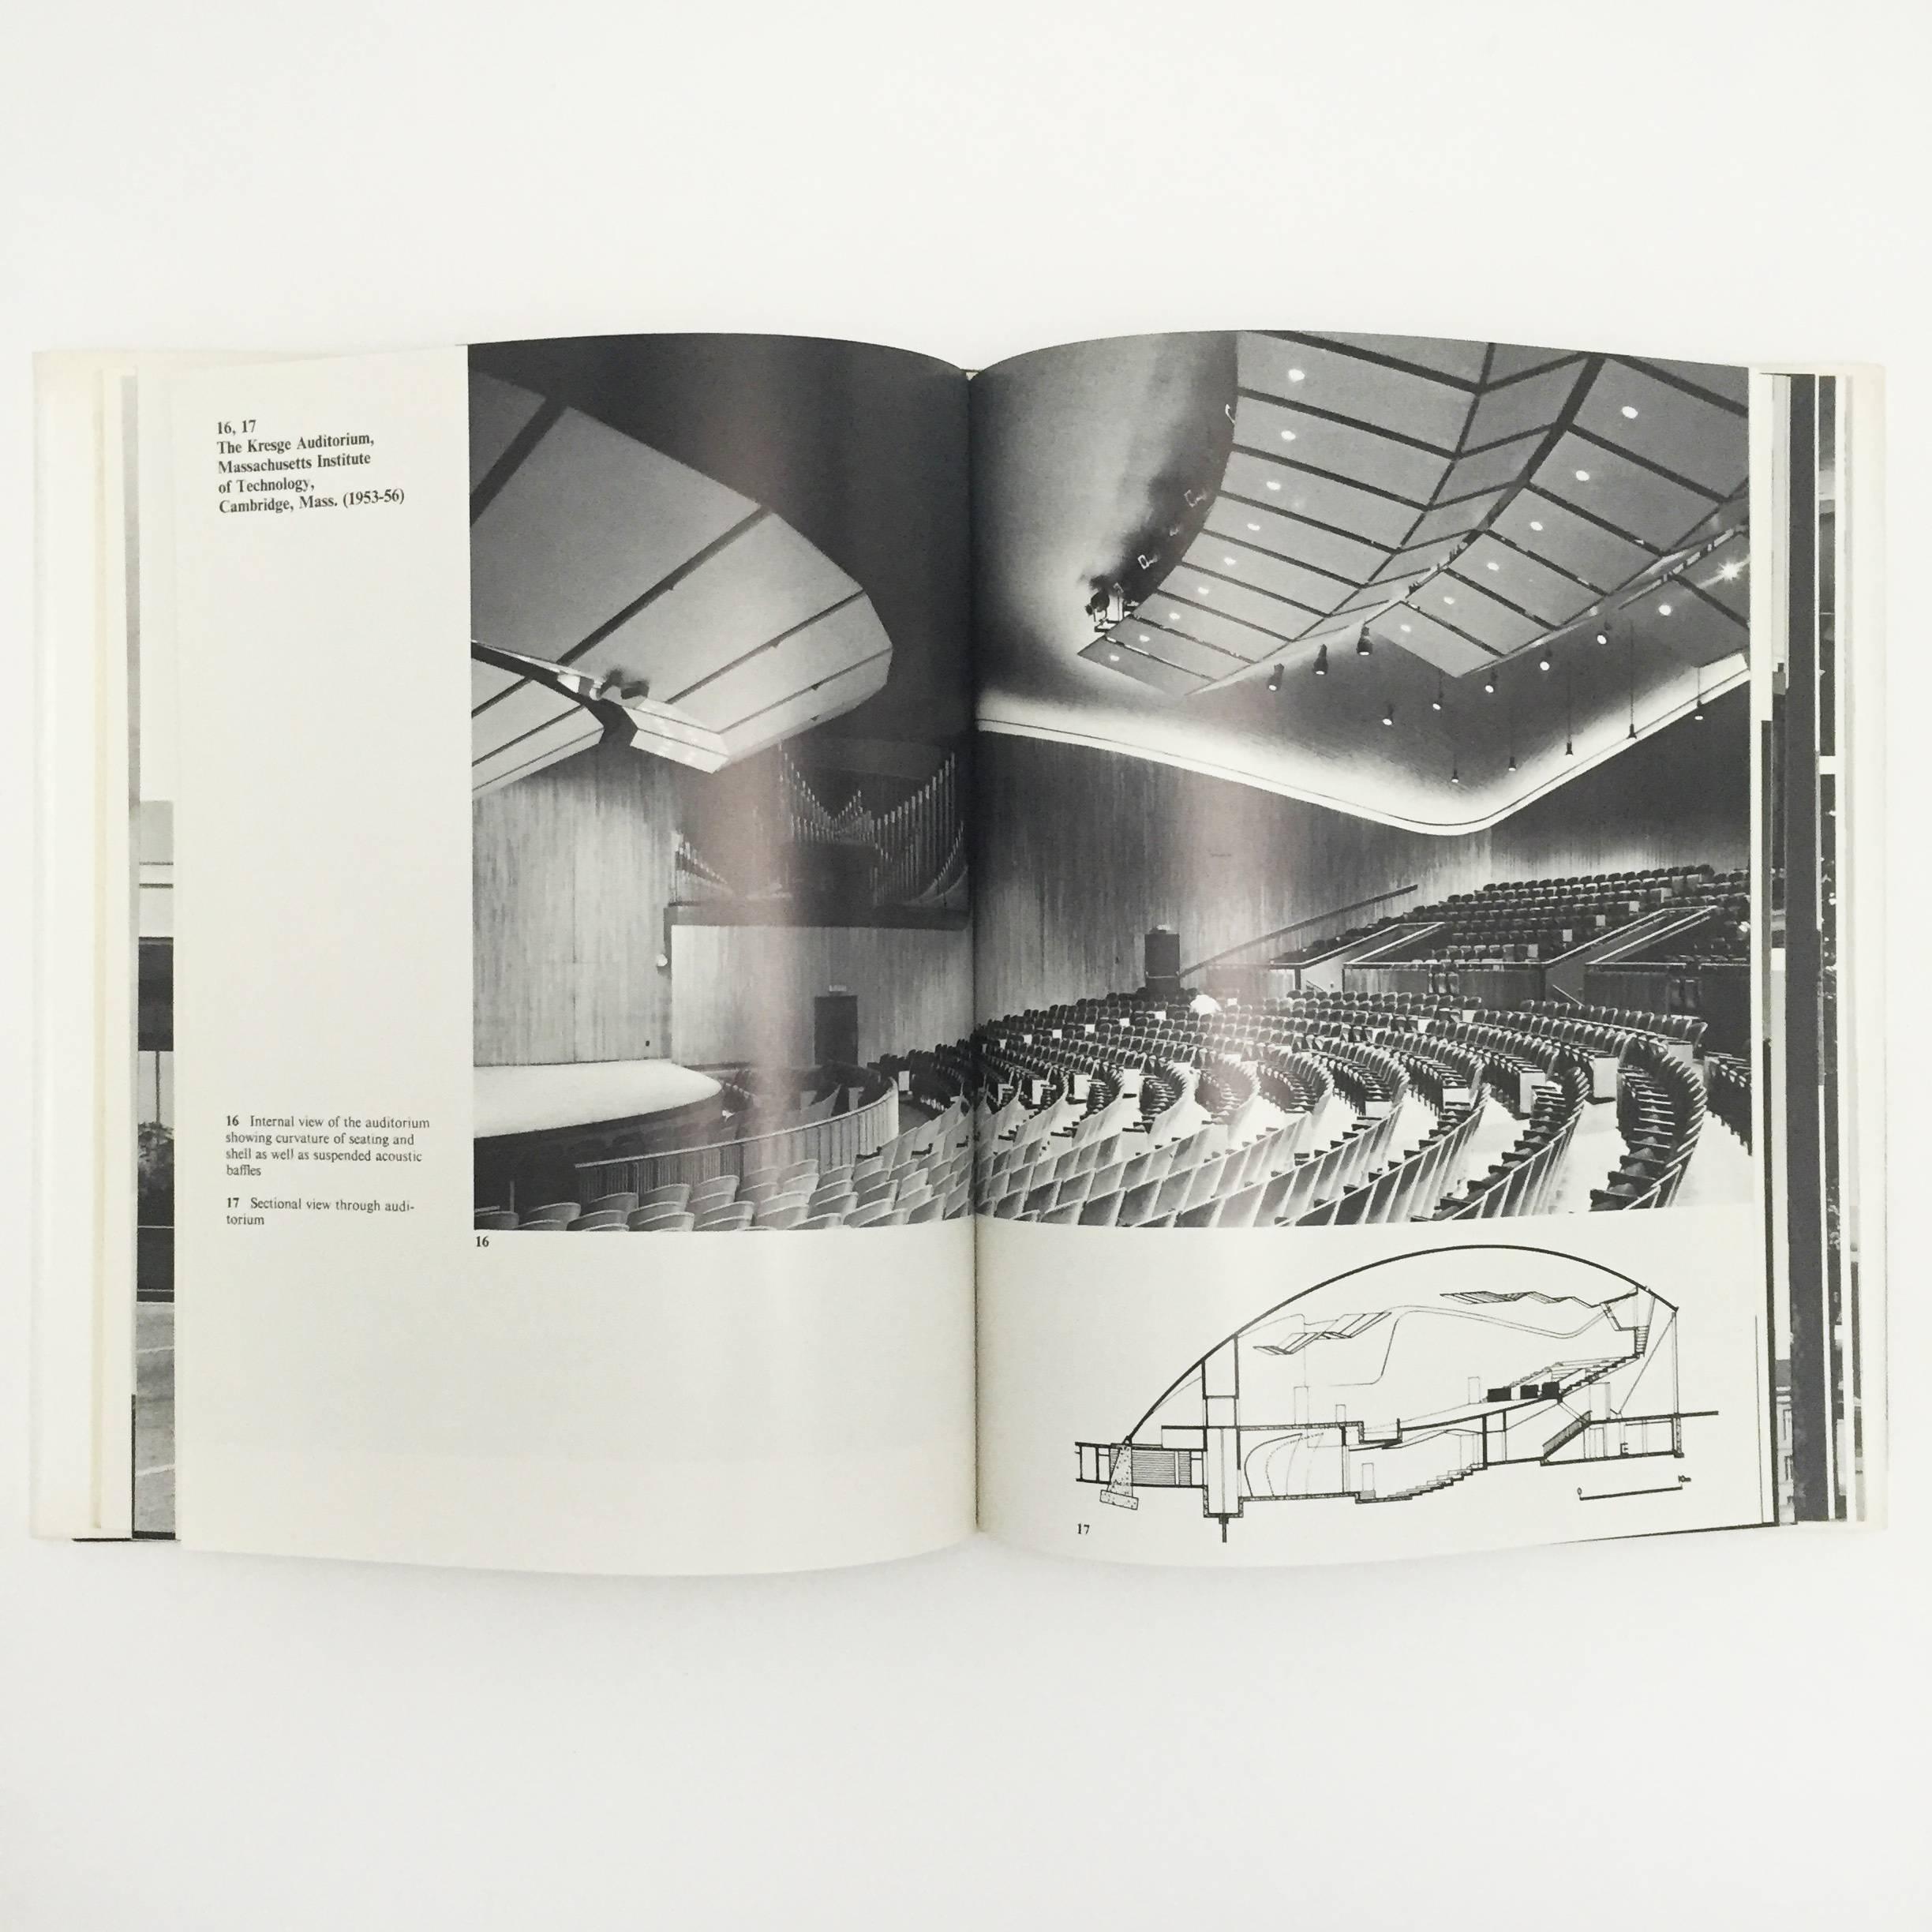 First edition, published by Simon and Schuster, New York, 1971.

Introduction by Rupert Spade, with 70 photographs by Yukio Futagawa.

One of the most renowned American architects of the mid-20th century, this book is part of a series devoted to